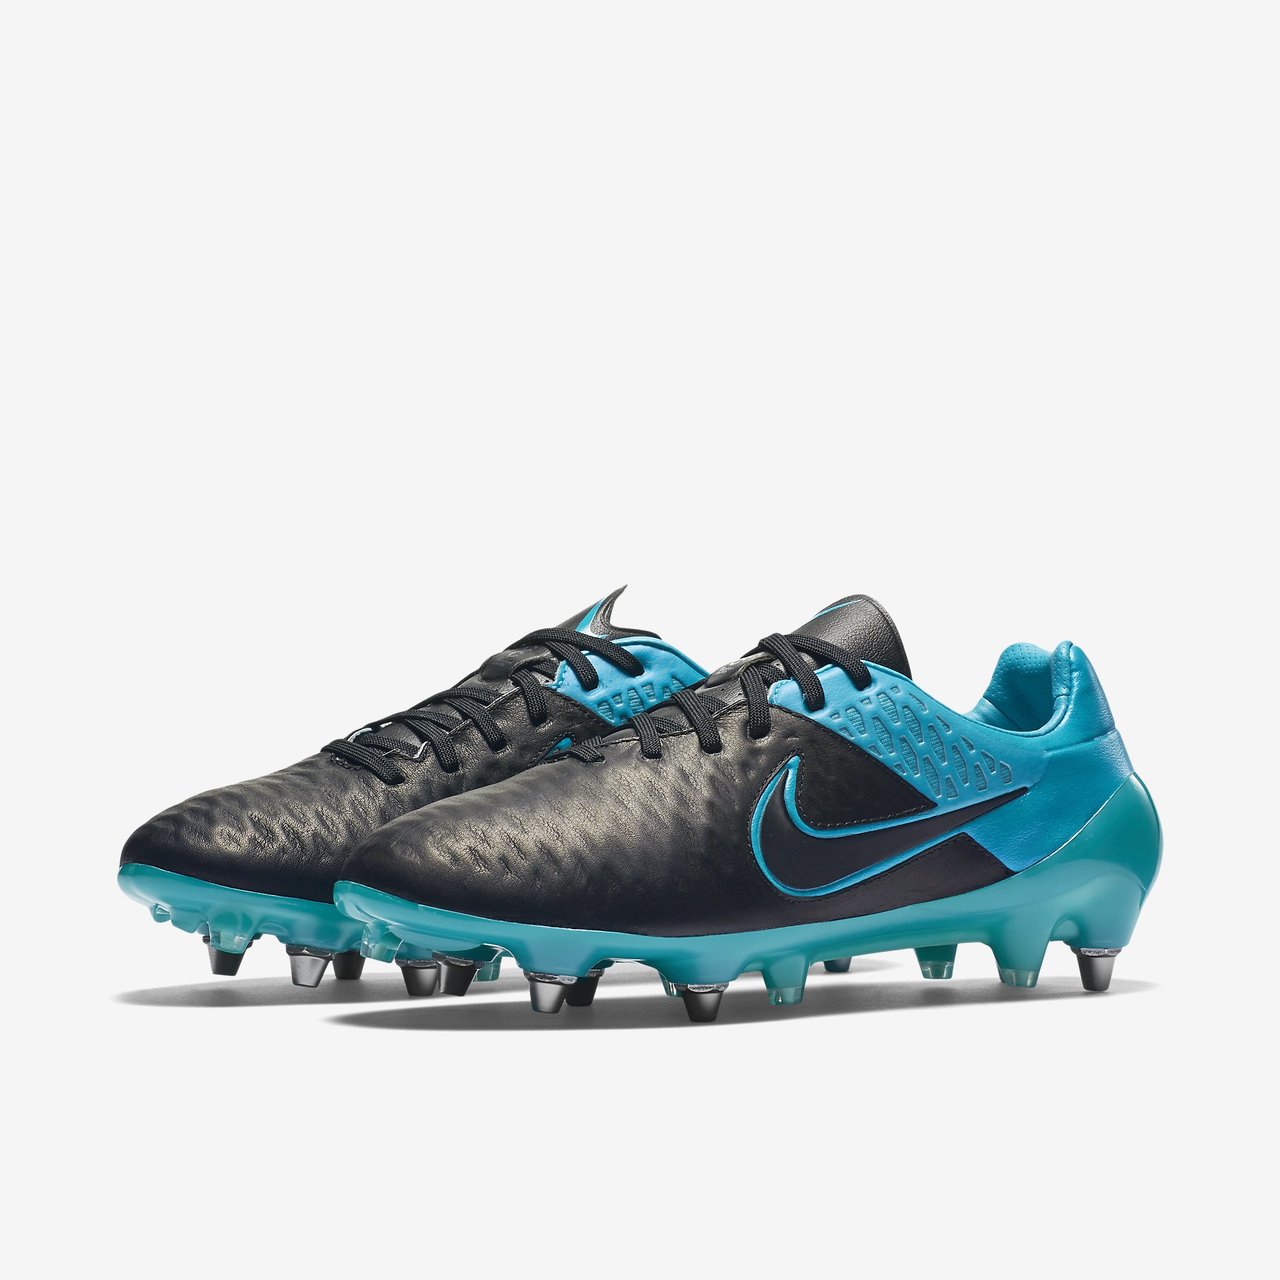 Nike Magista Opus - Tech Craft - / Turquoise Blue / Black - Football Shirt Culture Latest Football Kit News and More